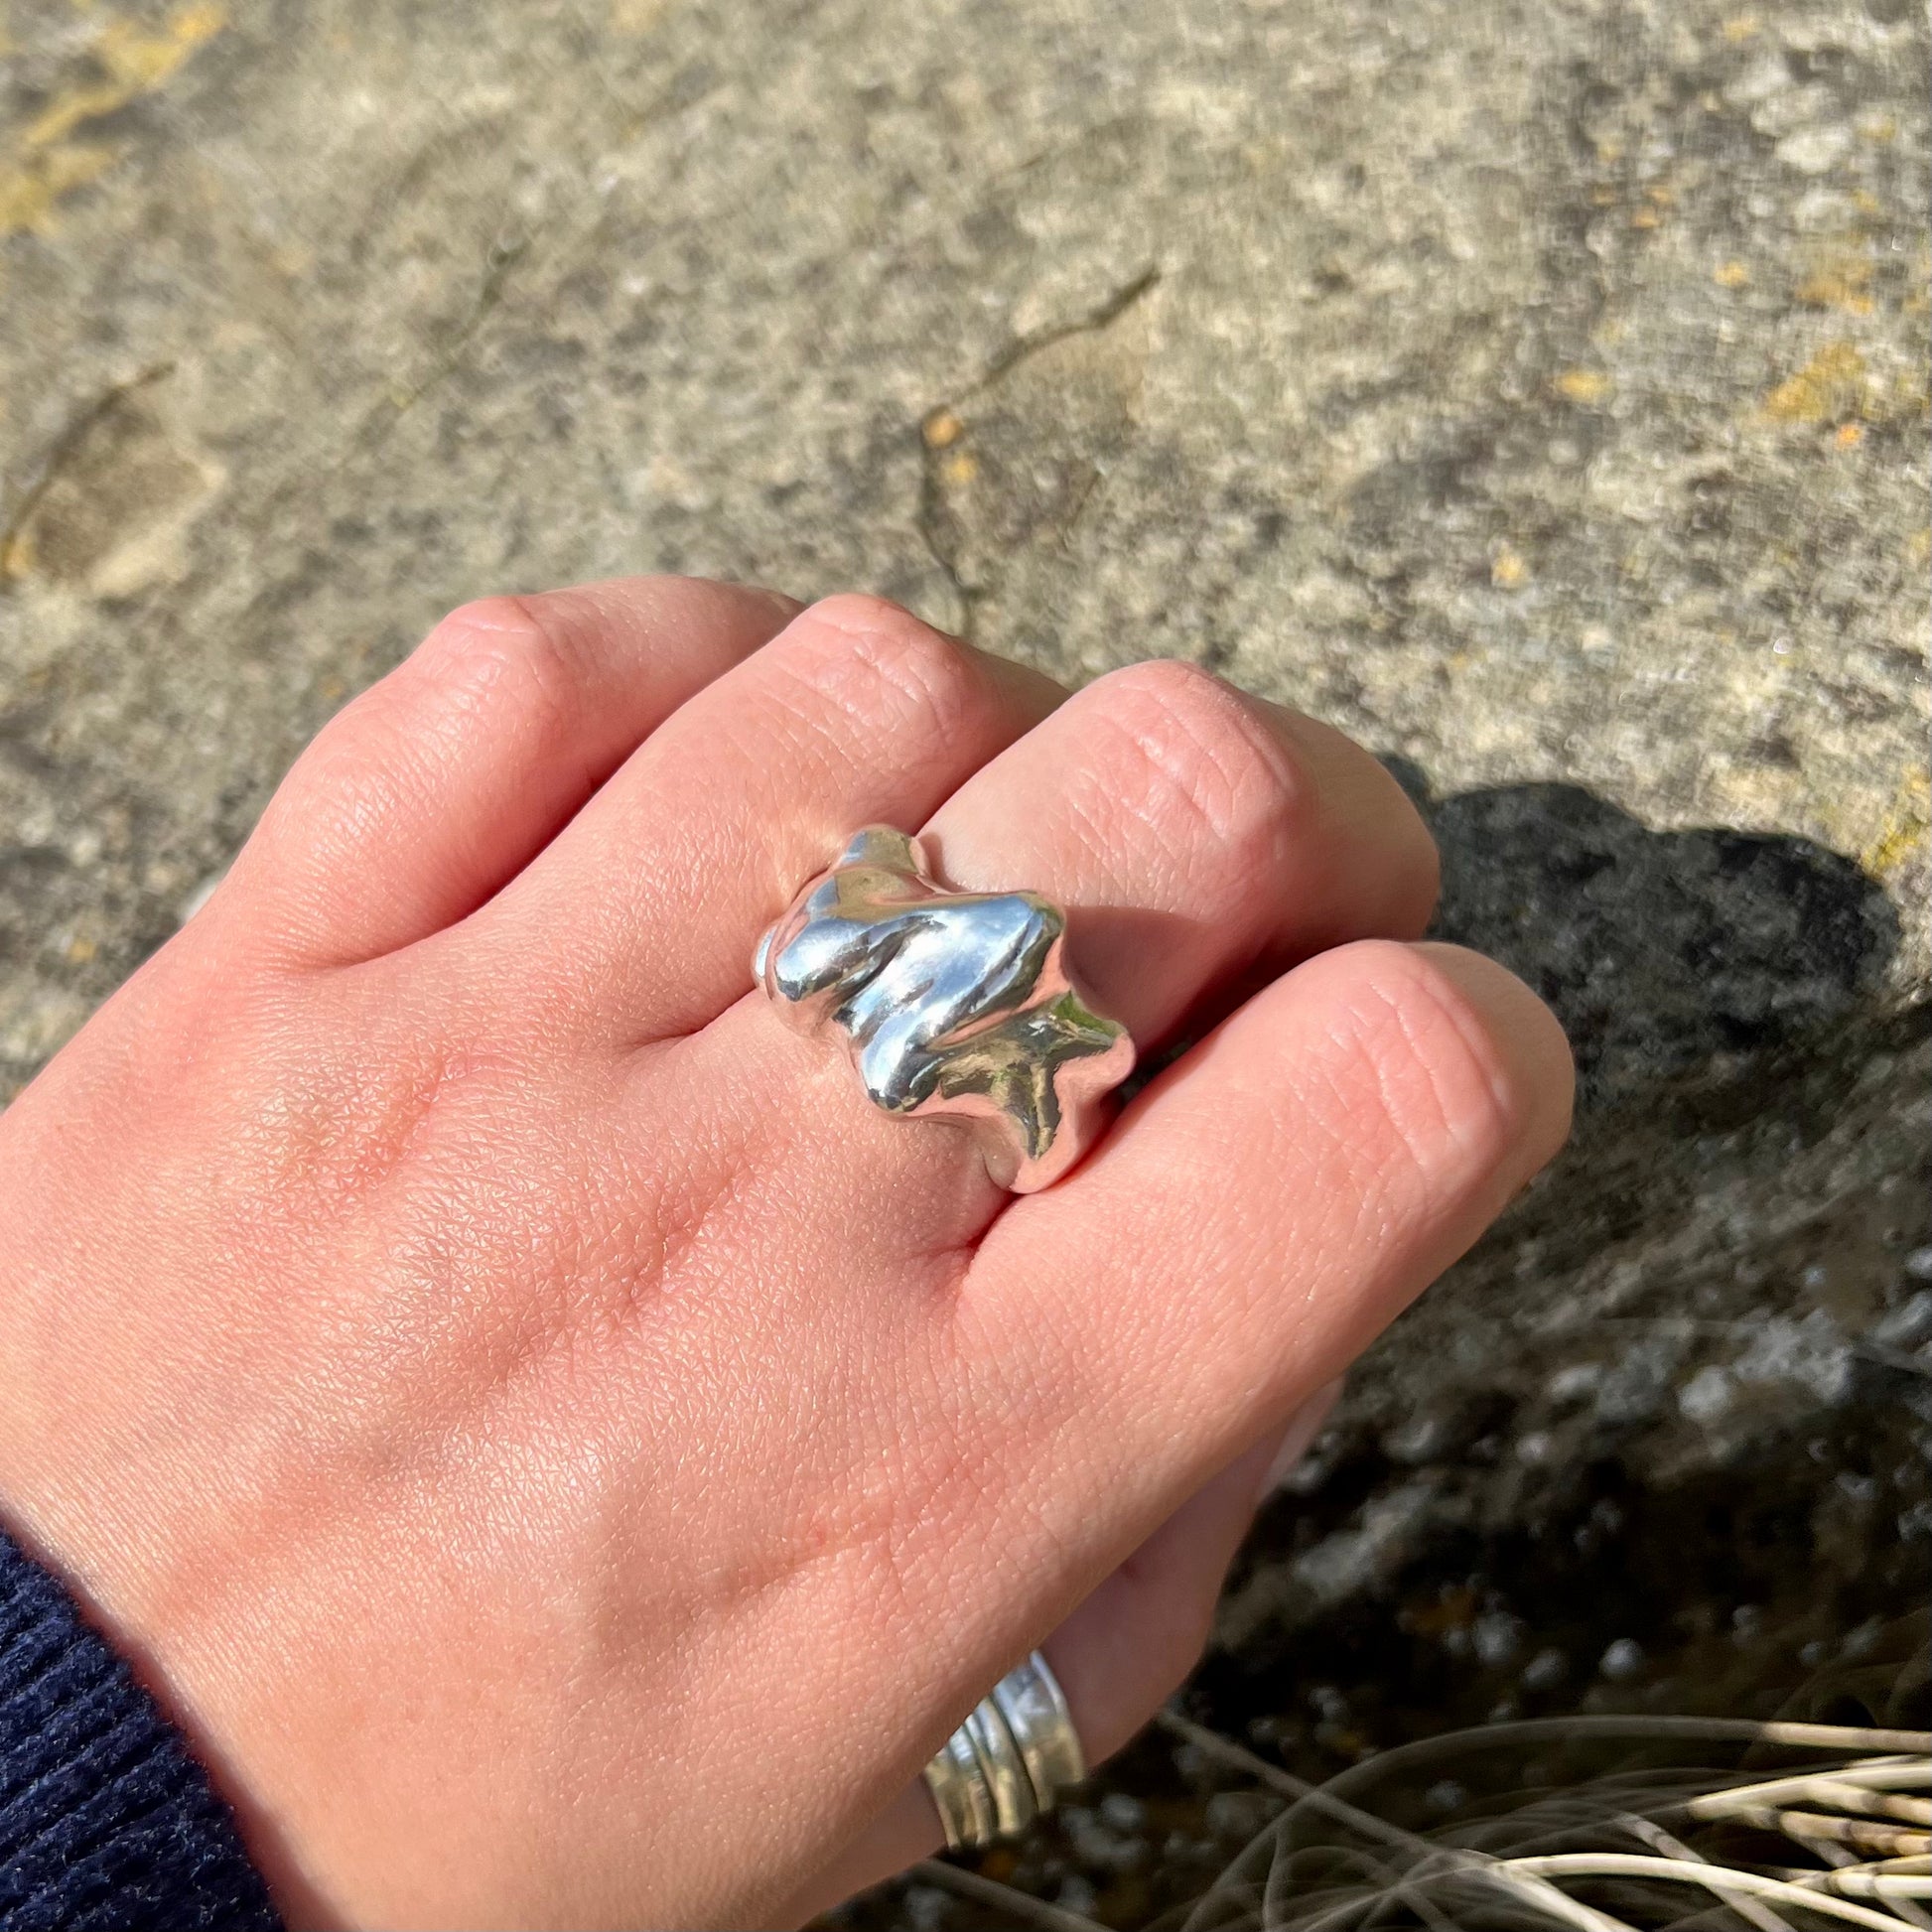 The Craggy ring. A chunky statement ring handmade in sterling silver which is photographed on a hand. The background is of a rock.